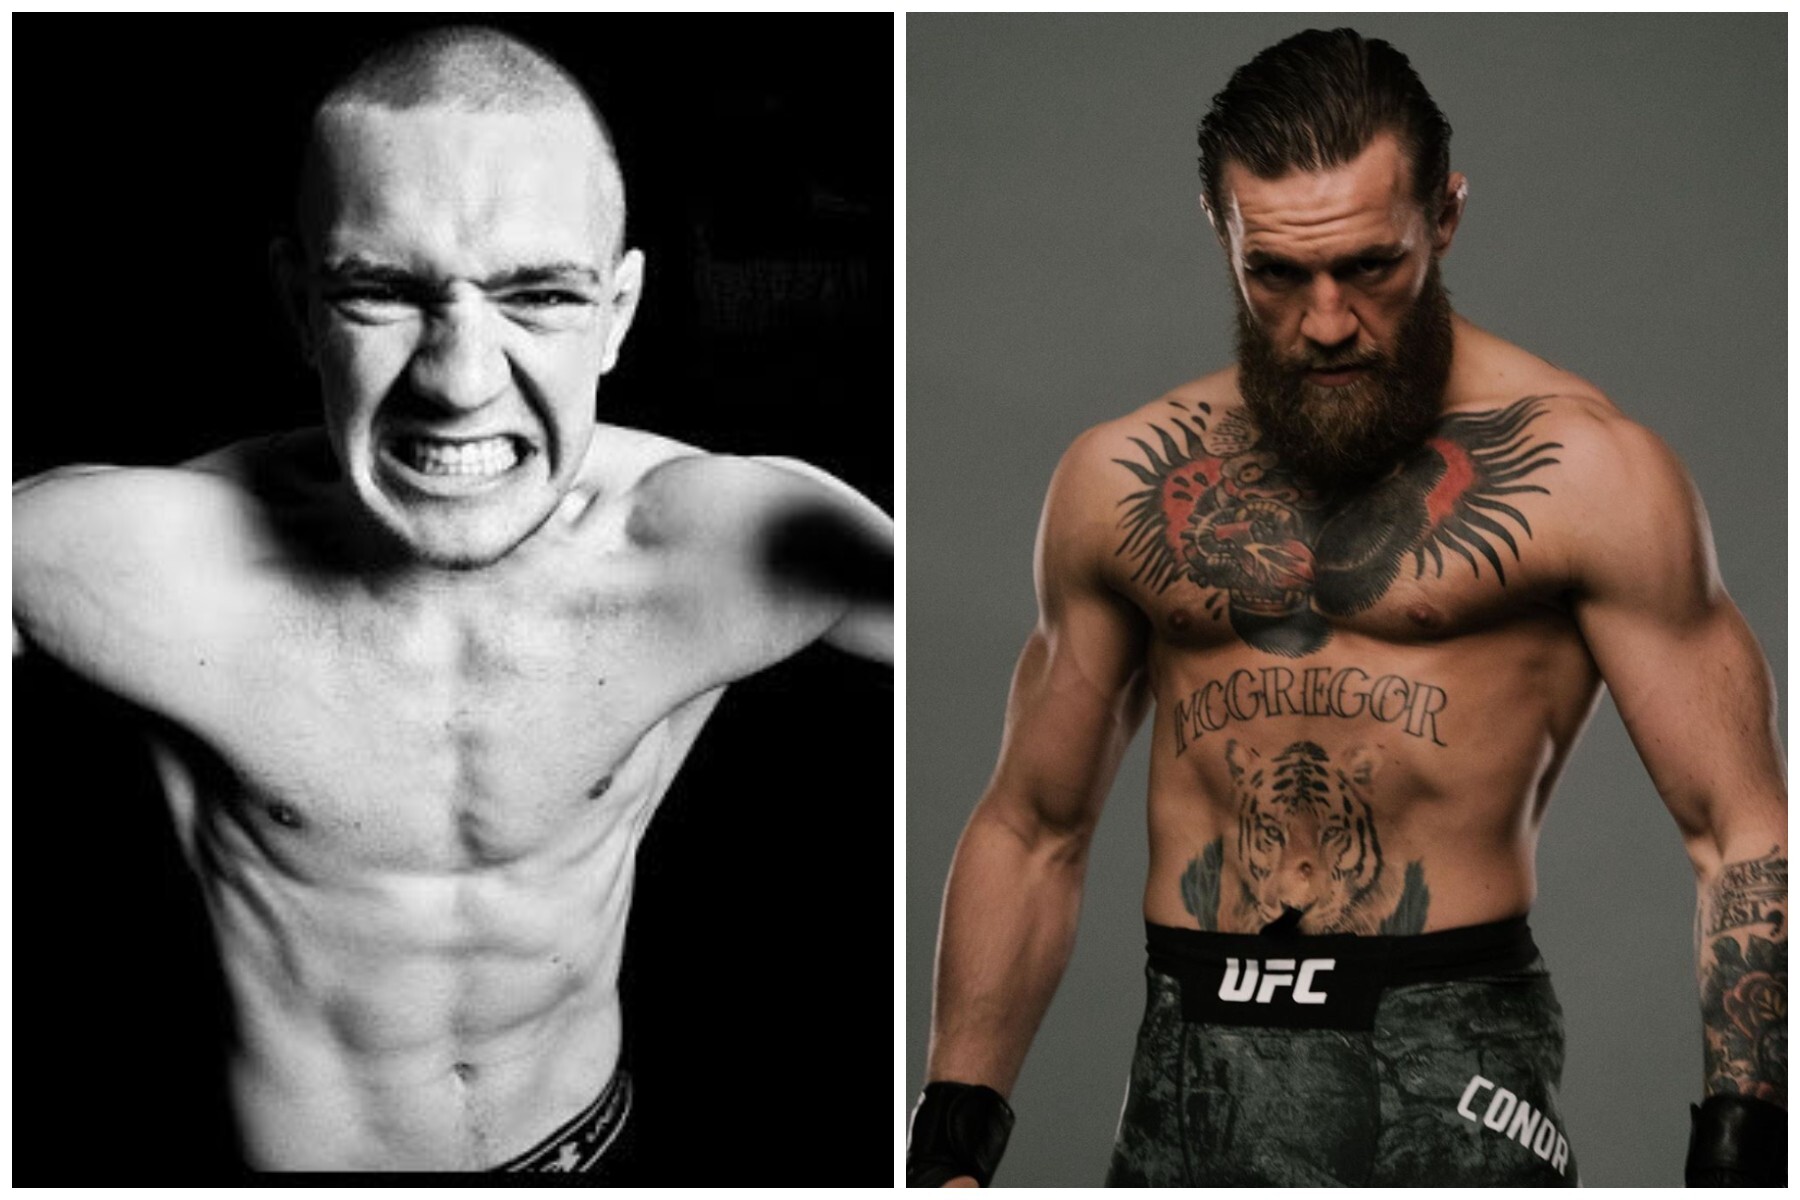 Conor McGregor: bio, net worth, fighting style and UFC 257 rematch